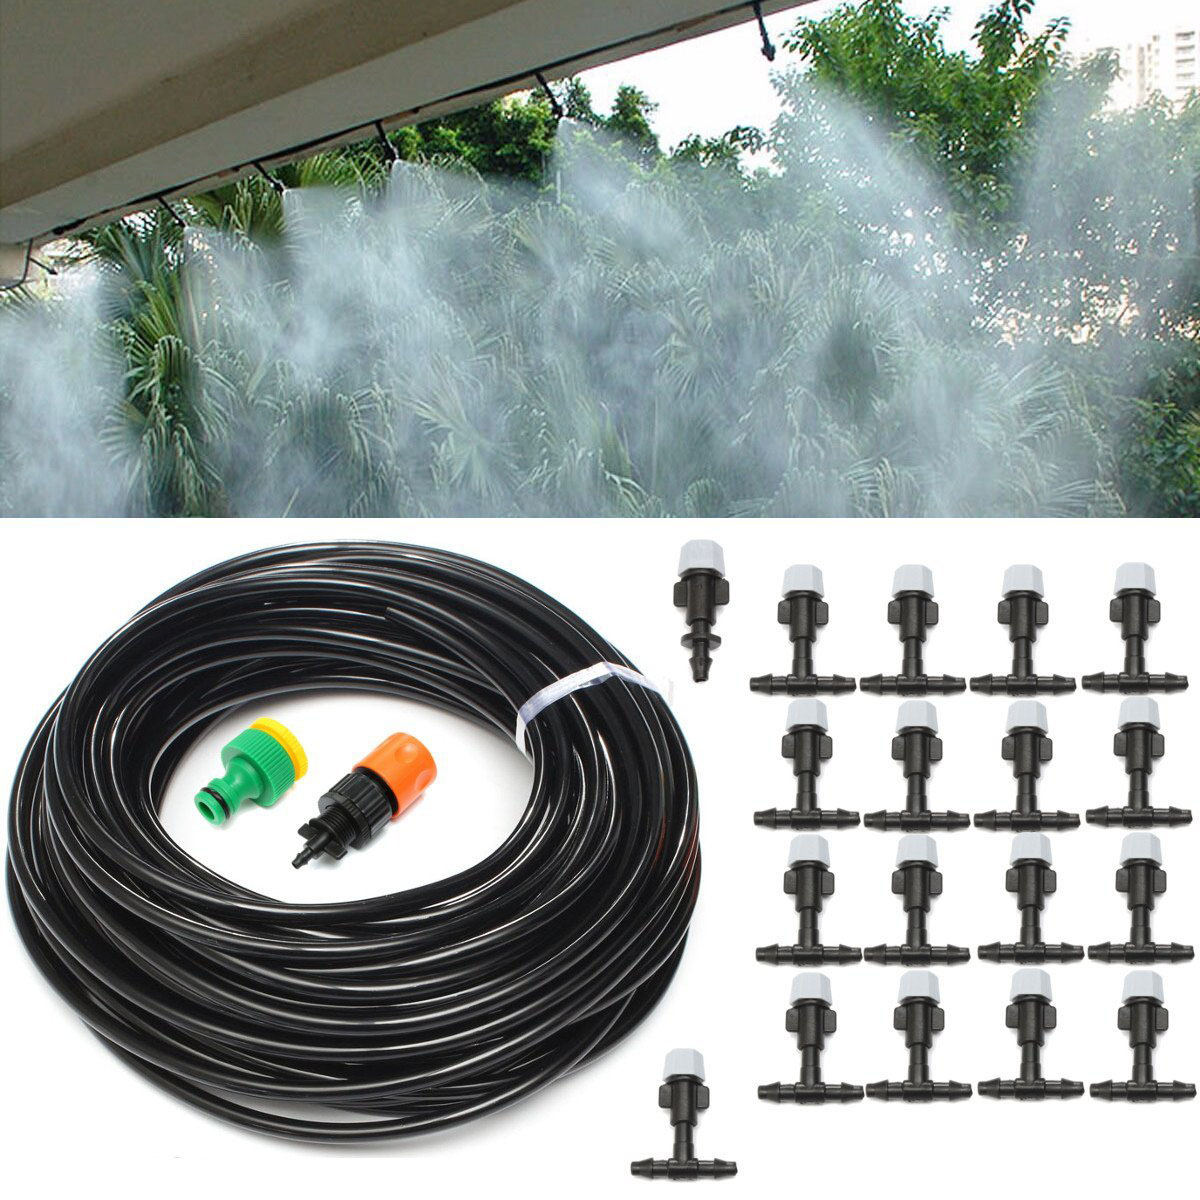 

20m Hose Mist Cooling System Garden Water Drip Irrigation Watering System Tool Sprinkler Nozzle